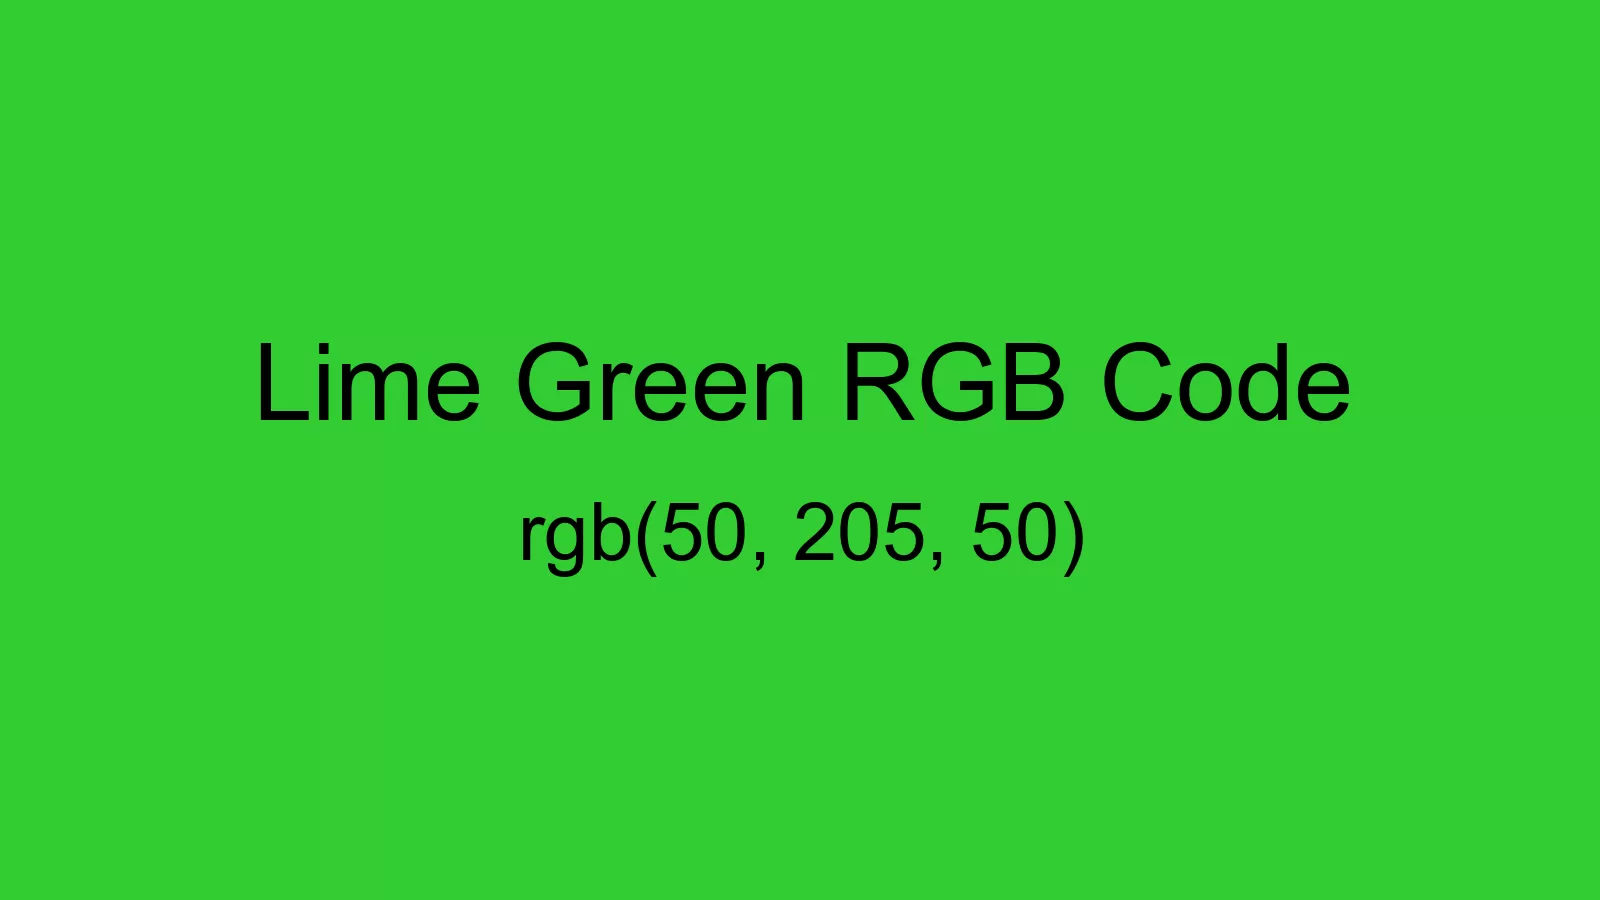 preview image of Lime Green color and RGB code